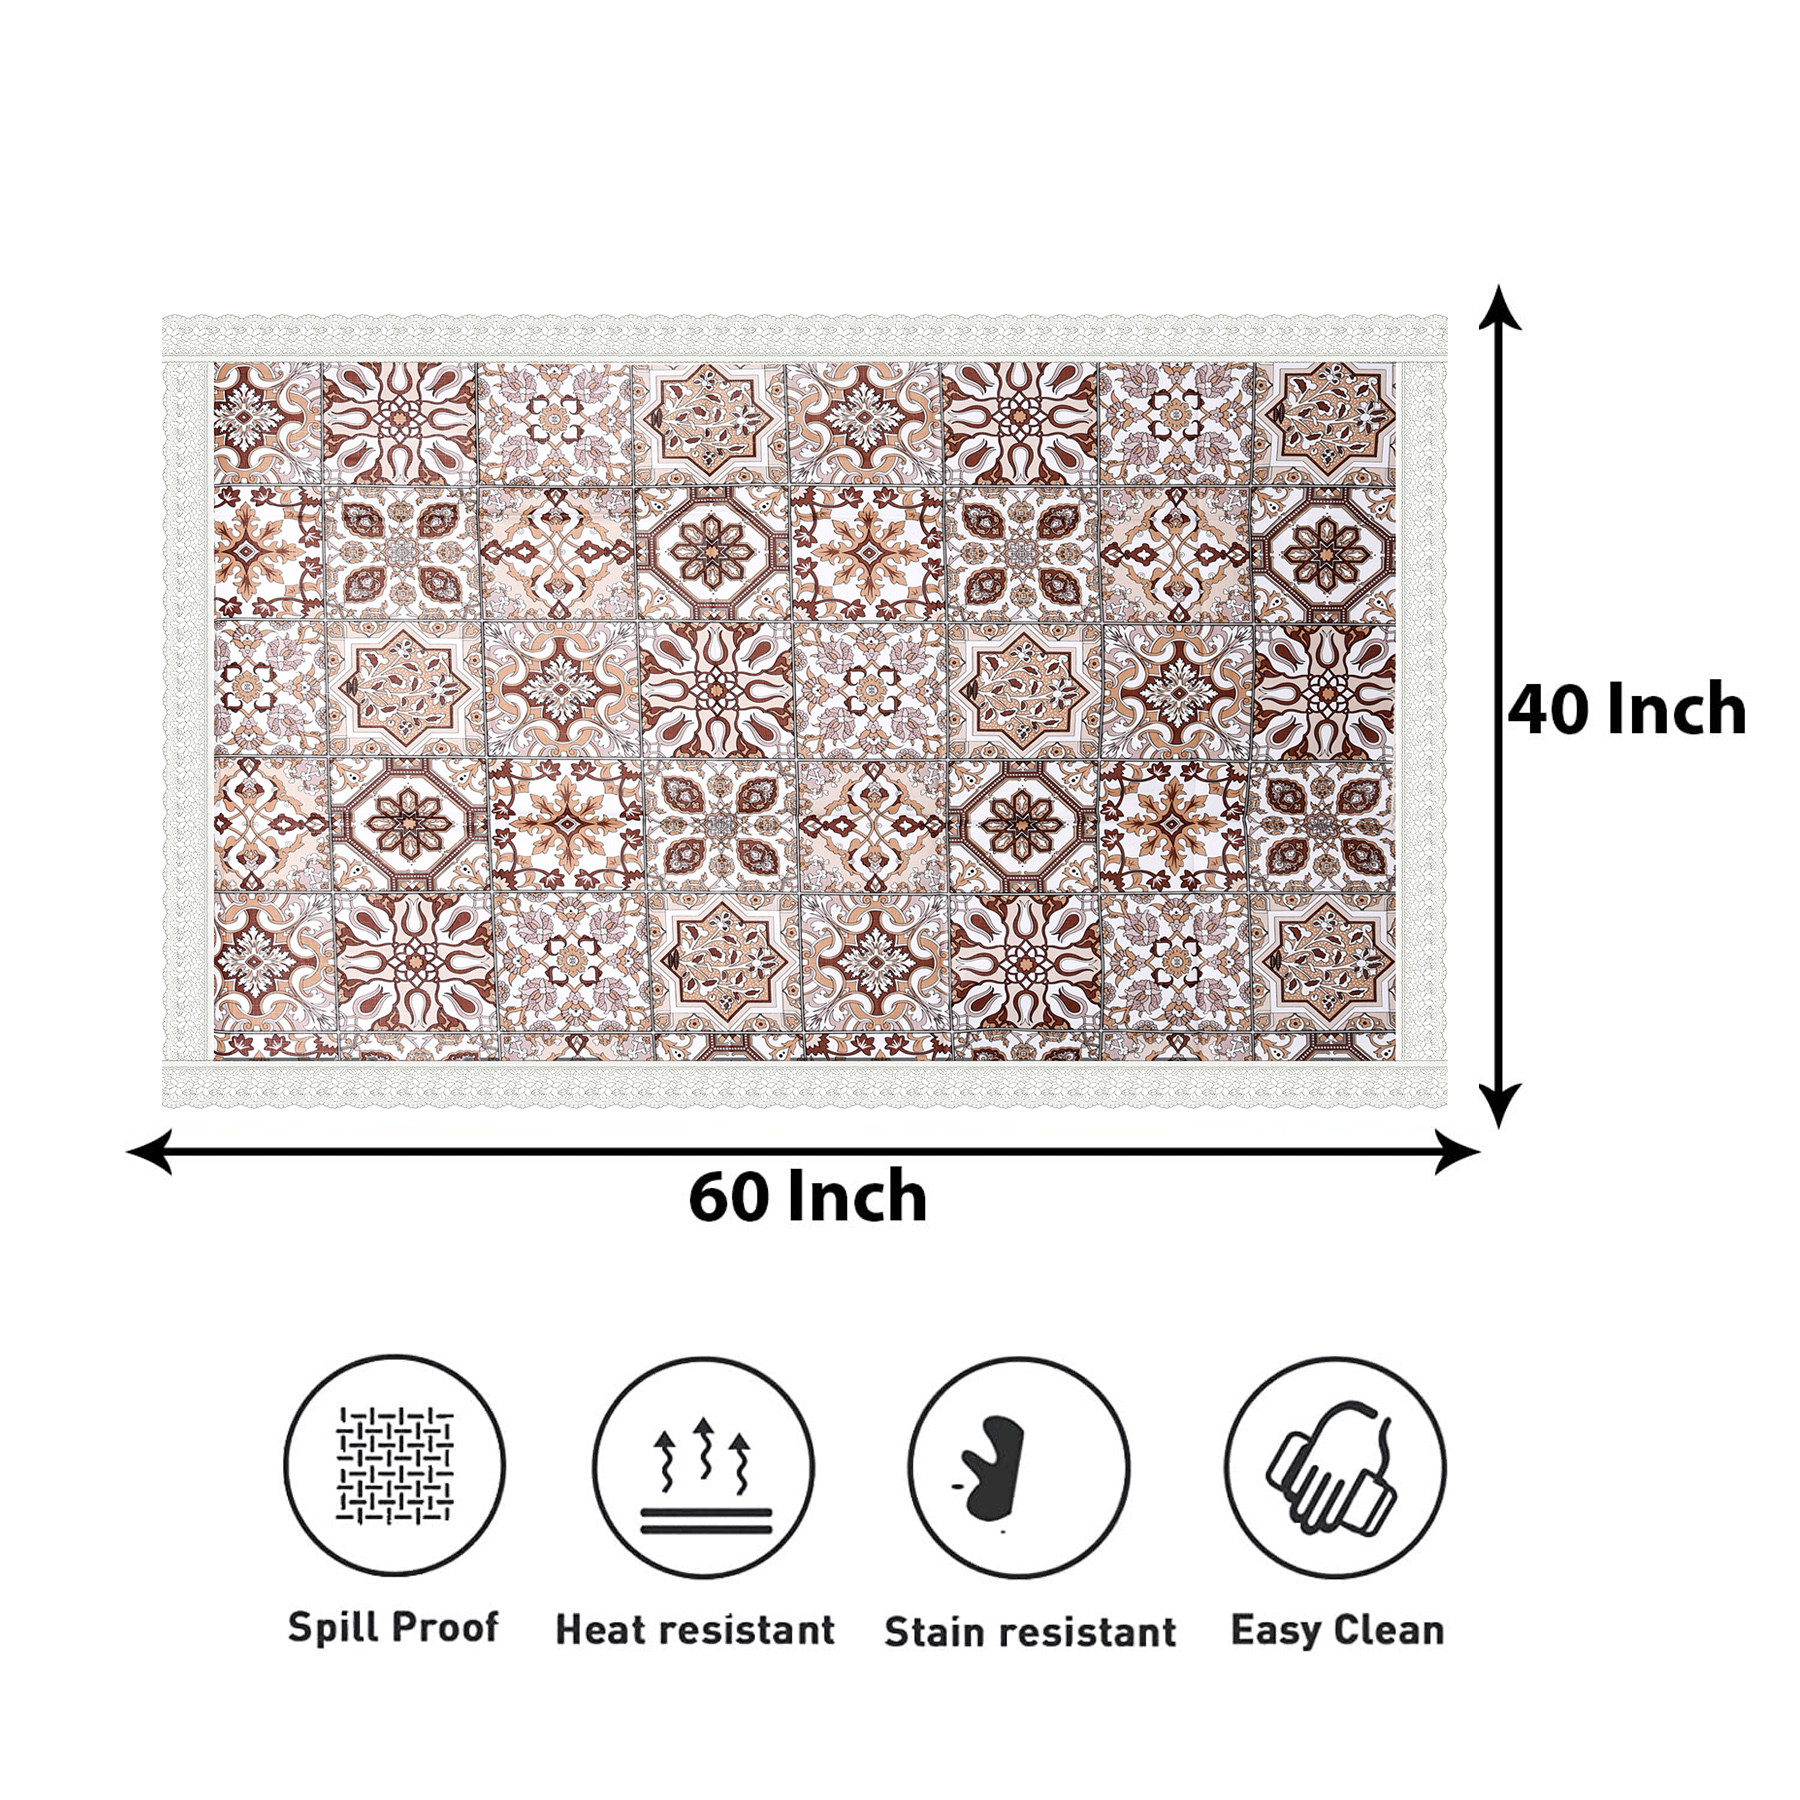 Kuber Industries Center Table Cover | PVC Table Cover | Reusable Cloth Cover for Table Top | Star Design Center Table Cover | Table Protector Cover | 40x60 Inch | Brown